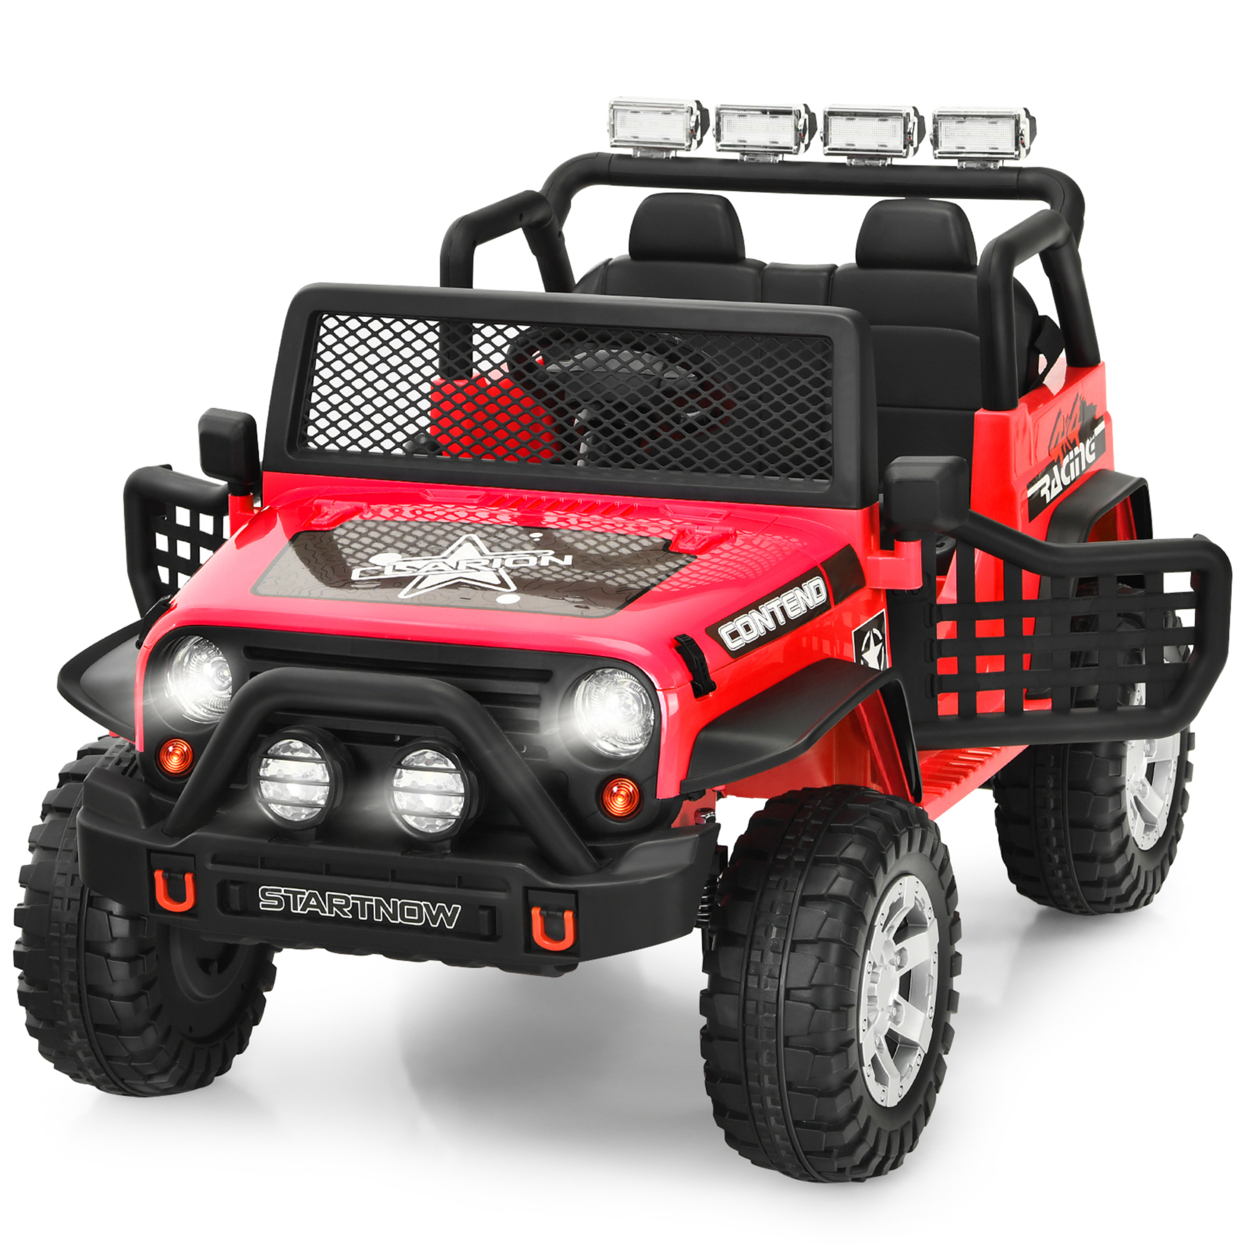 12V Electric Kids Ride On Car Truck W/ MP3 Horn 2.4G Remote Control - Red